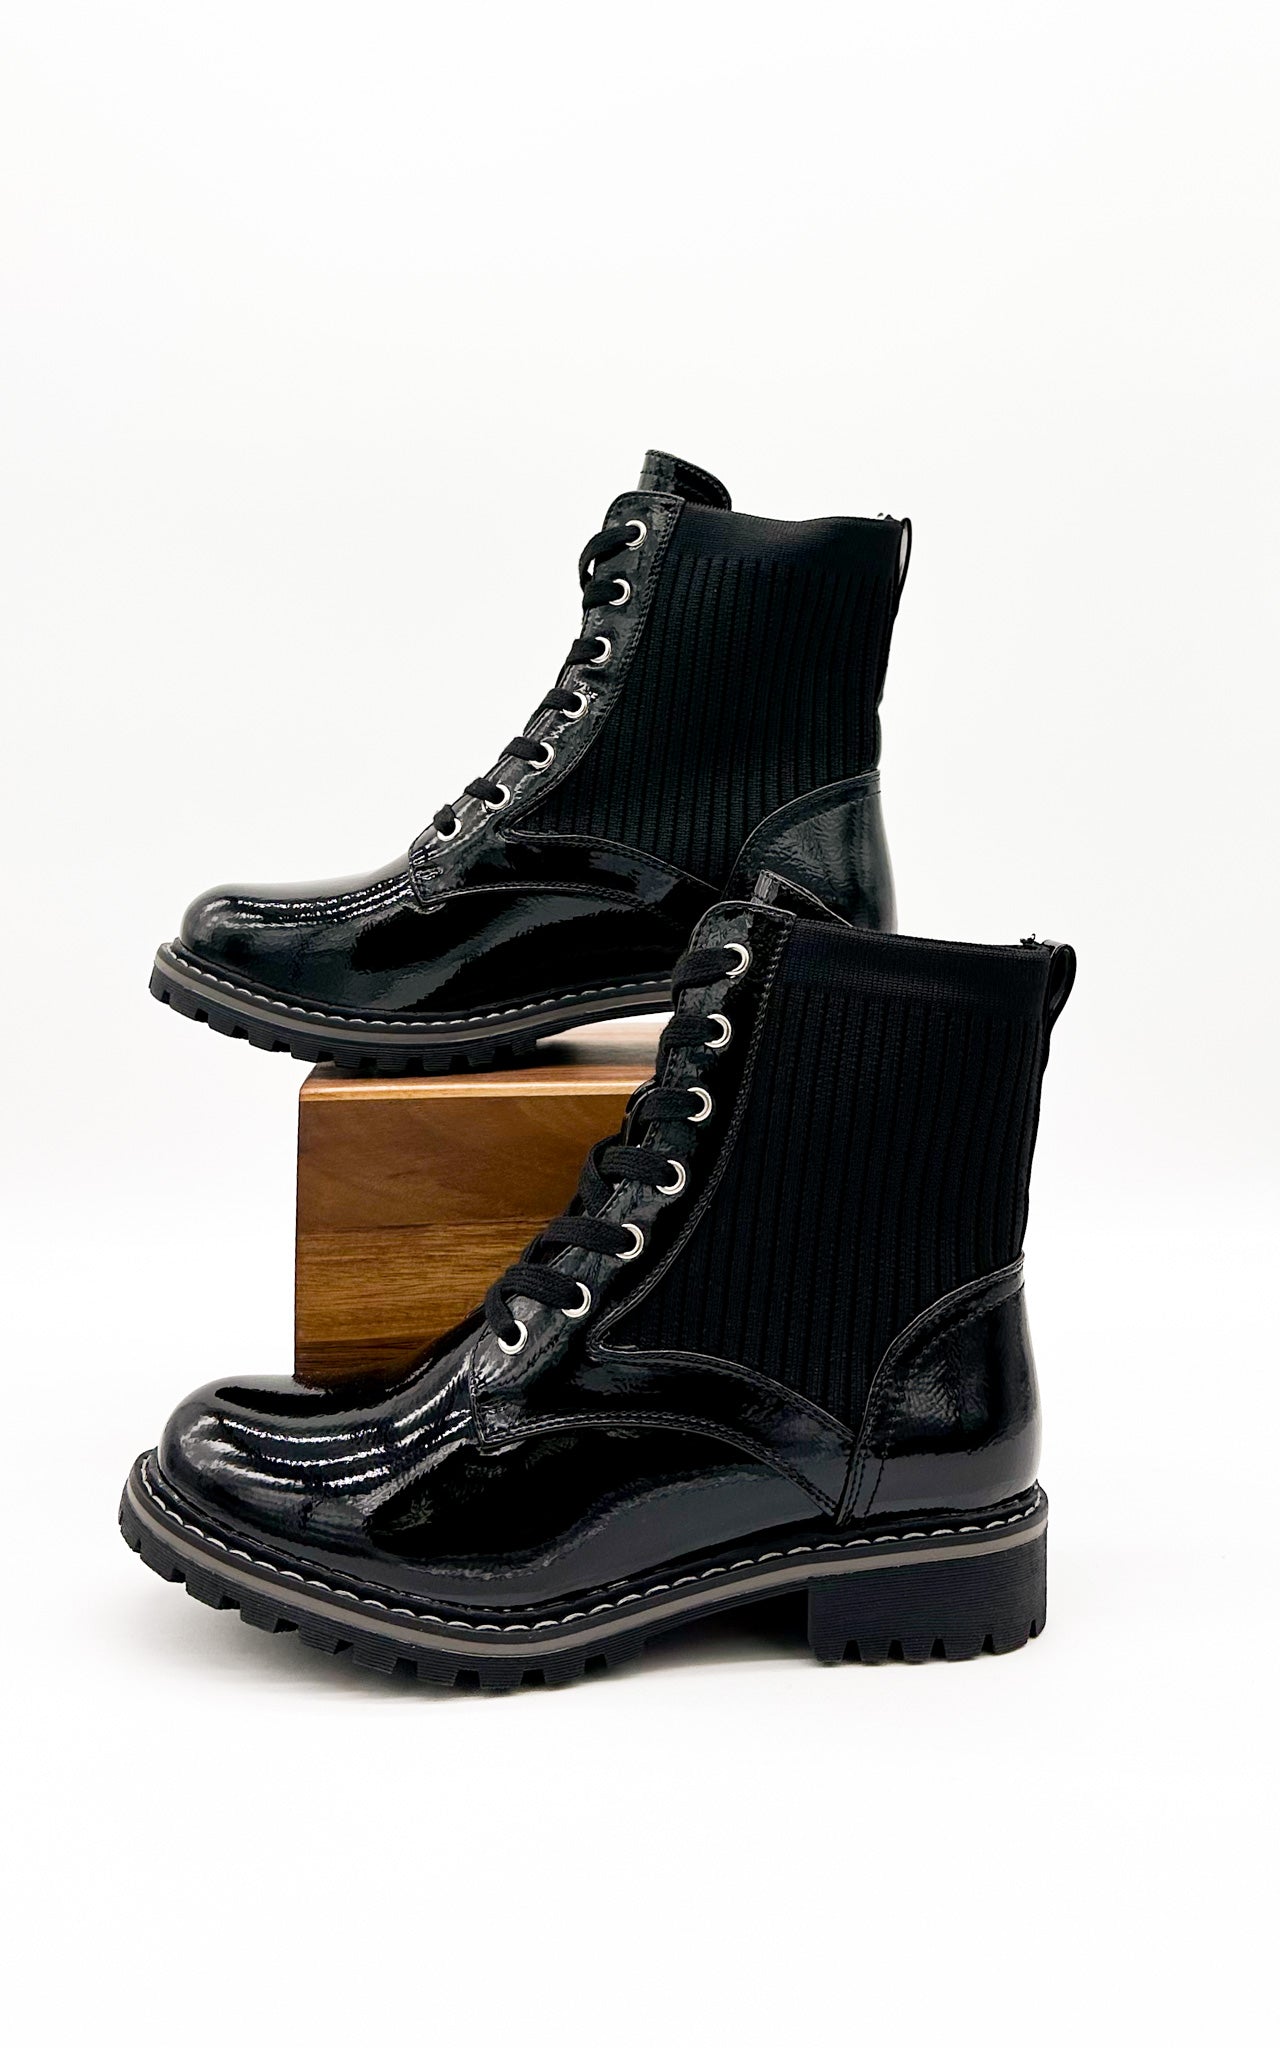 Corkys Creep It Real Boot in Black Patent